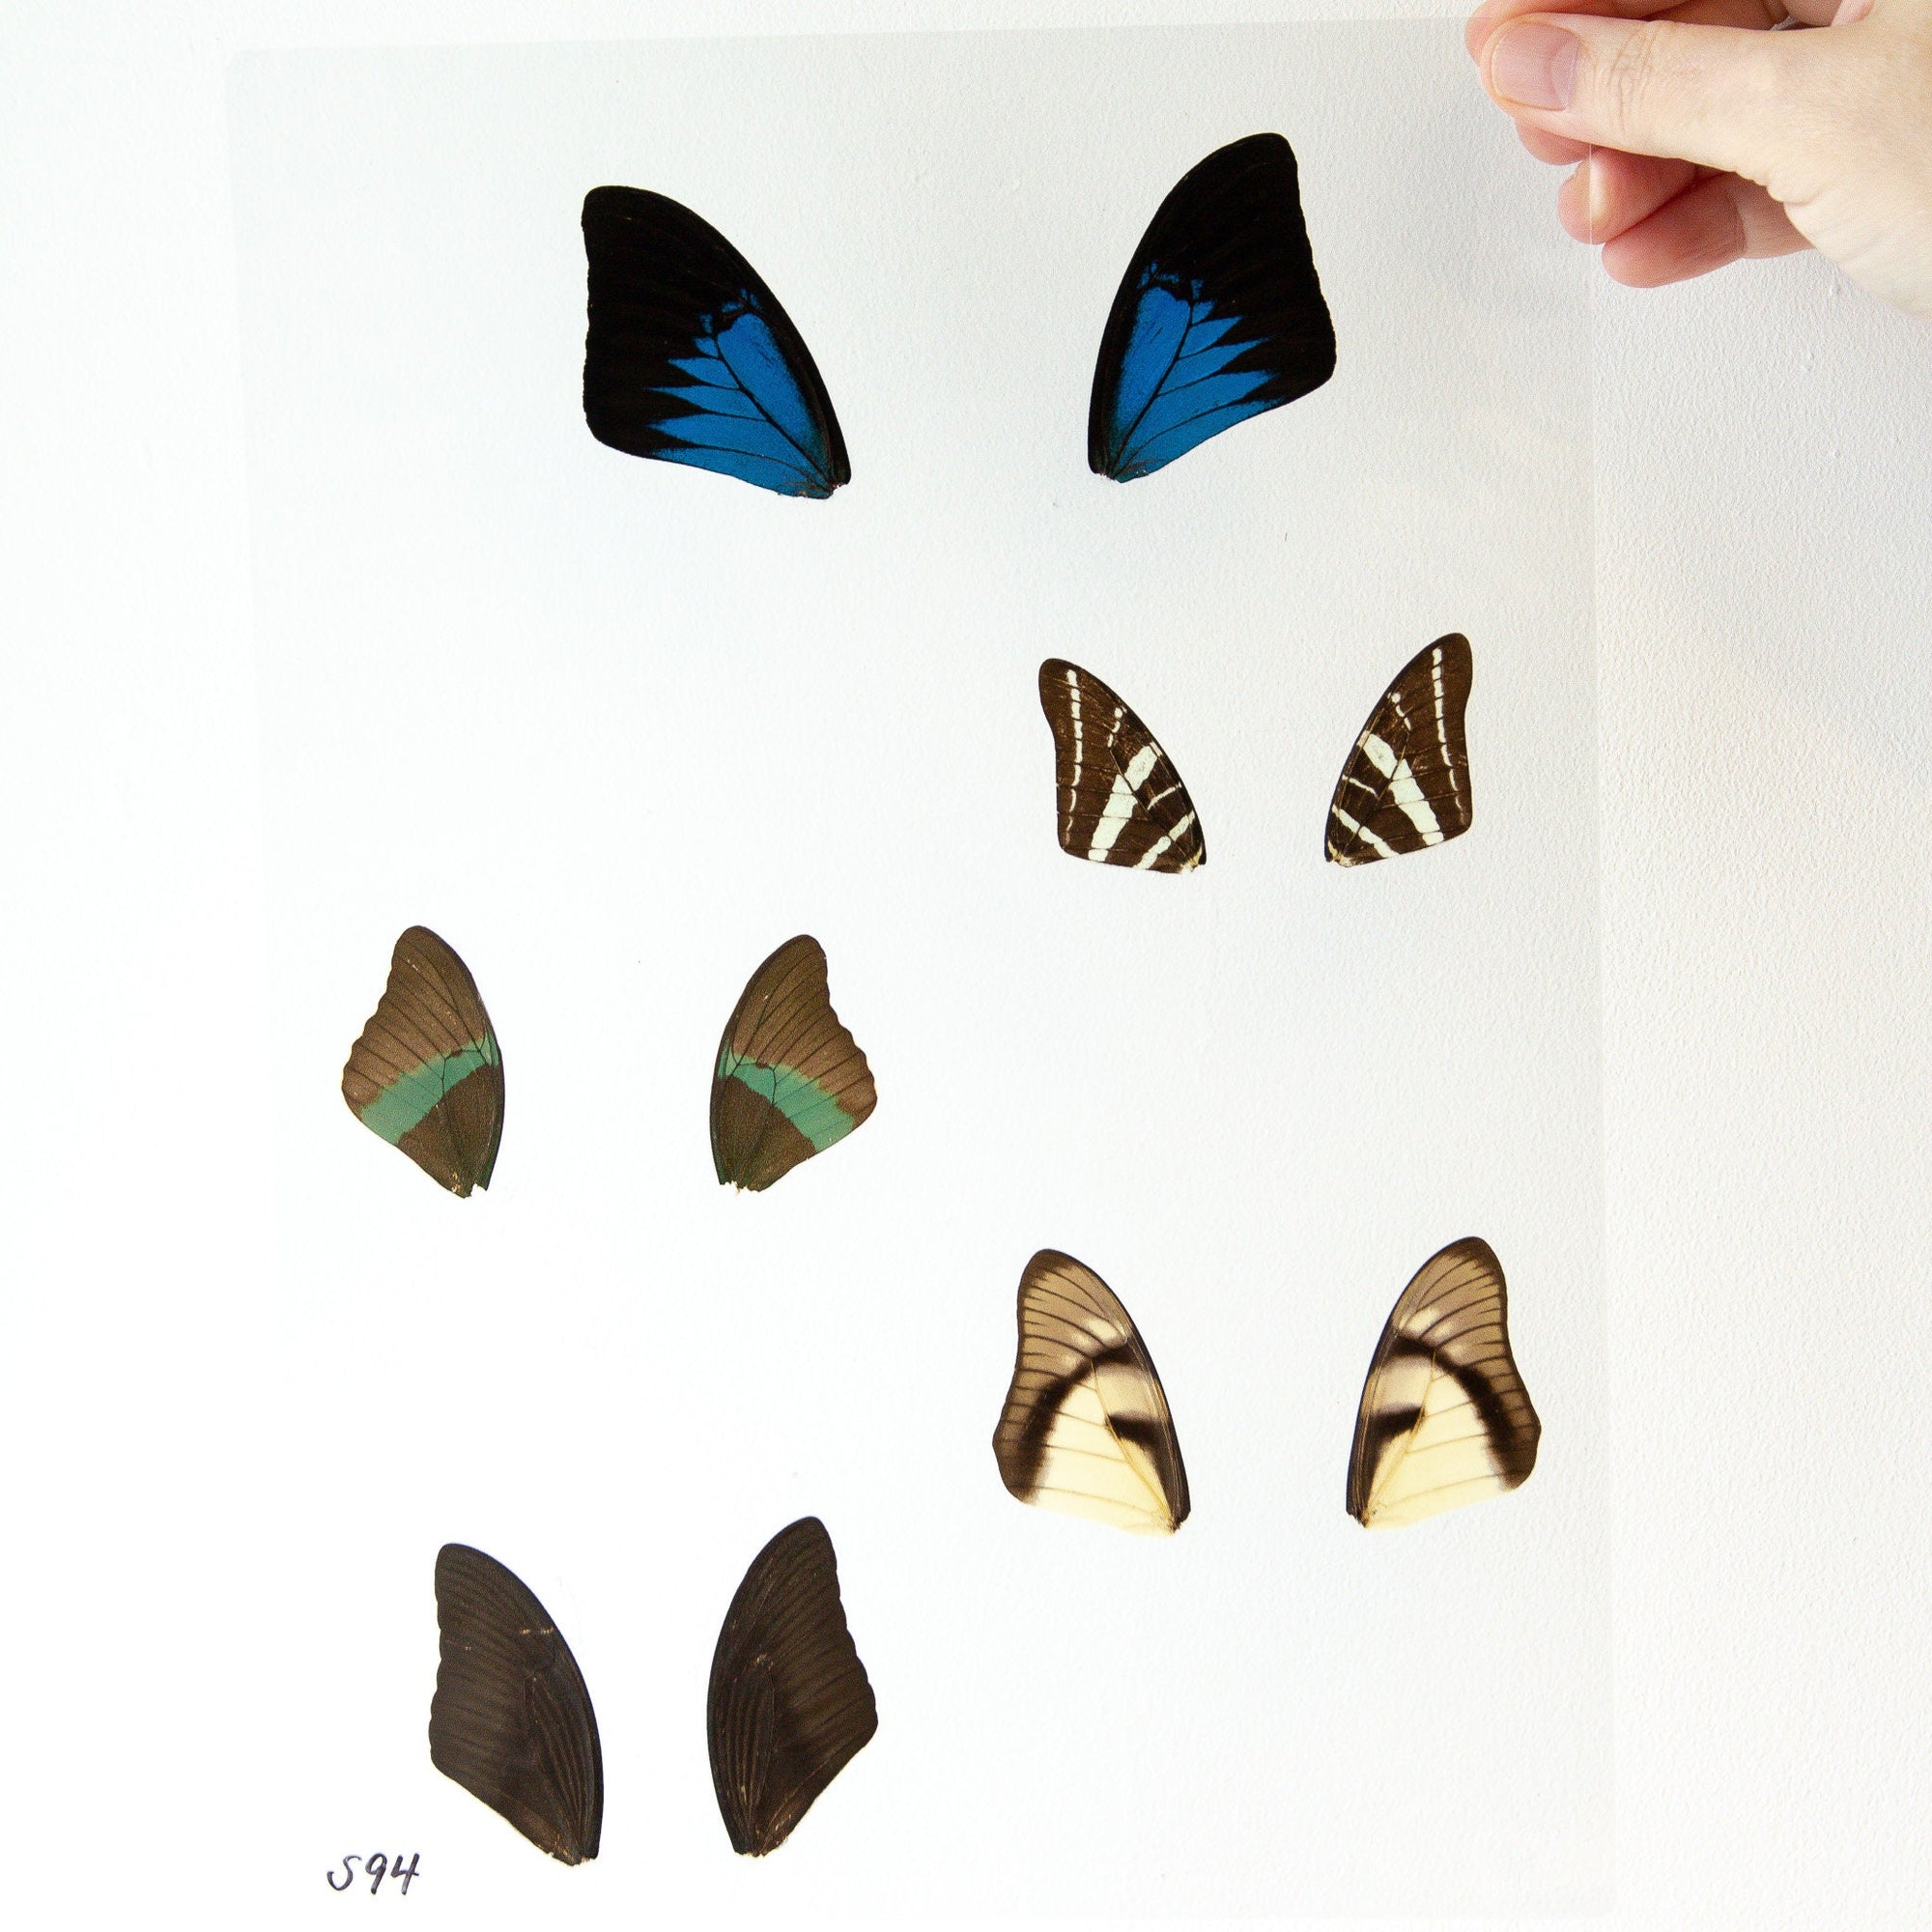 Butterfly Wings GLOSSY LAMINATED SHEET Real Ethically Sourced Specimens Moths Butterflies Wings for Art -- S94